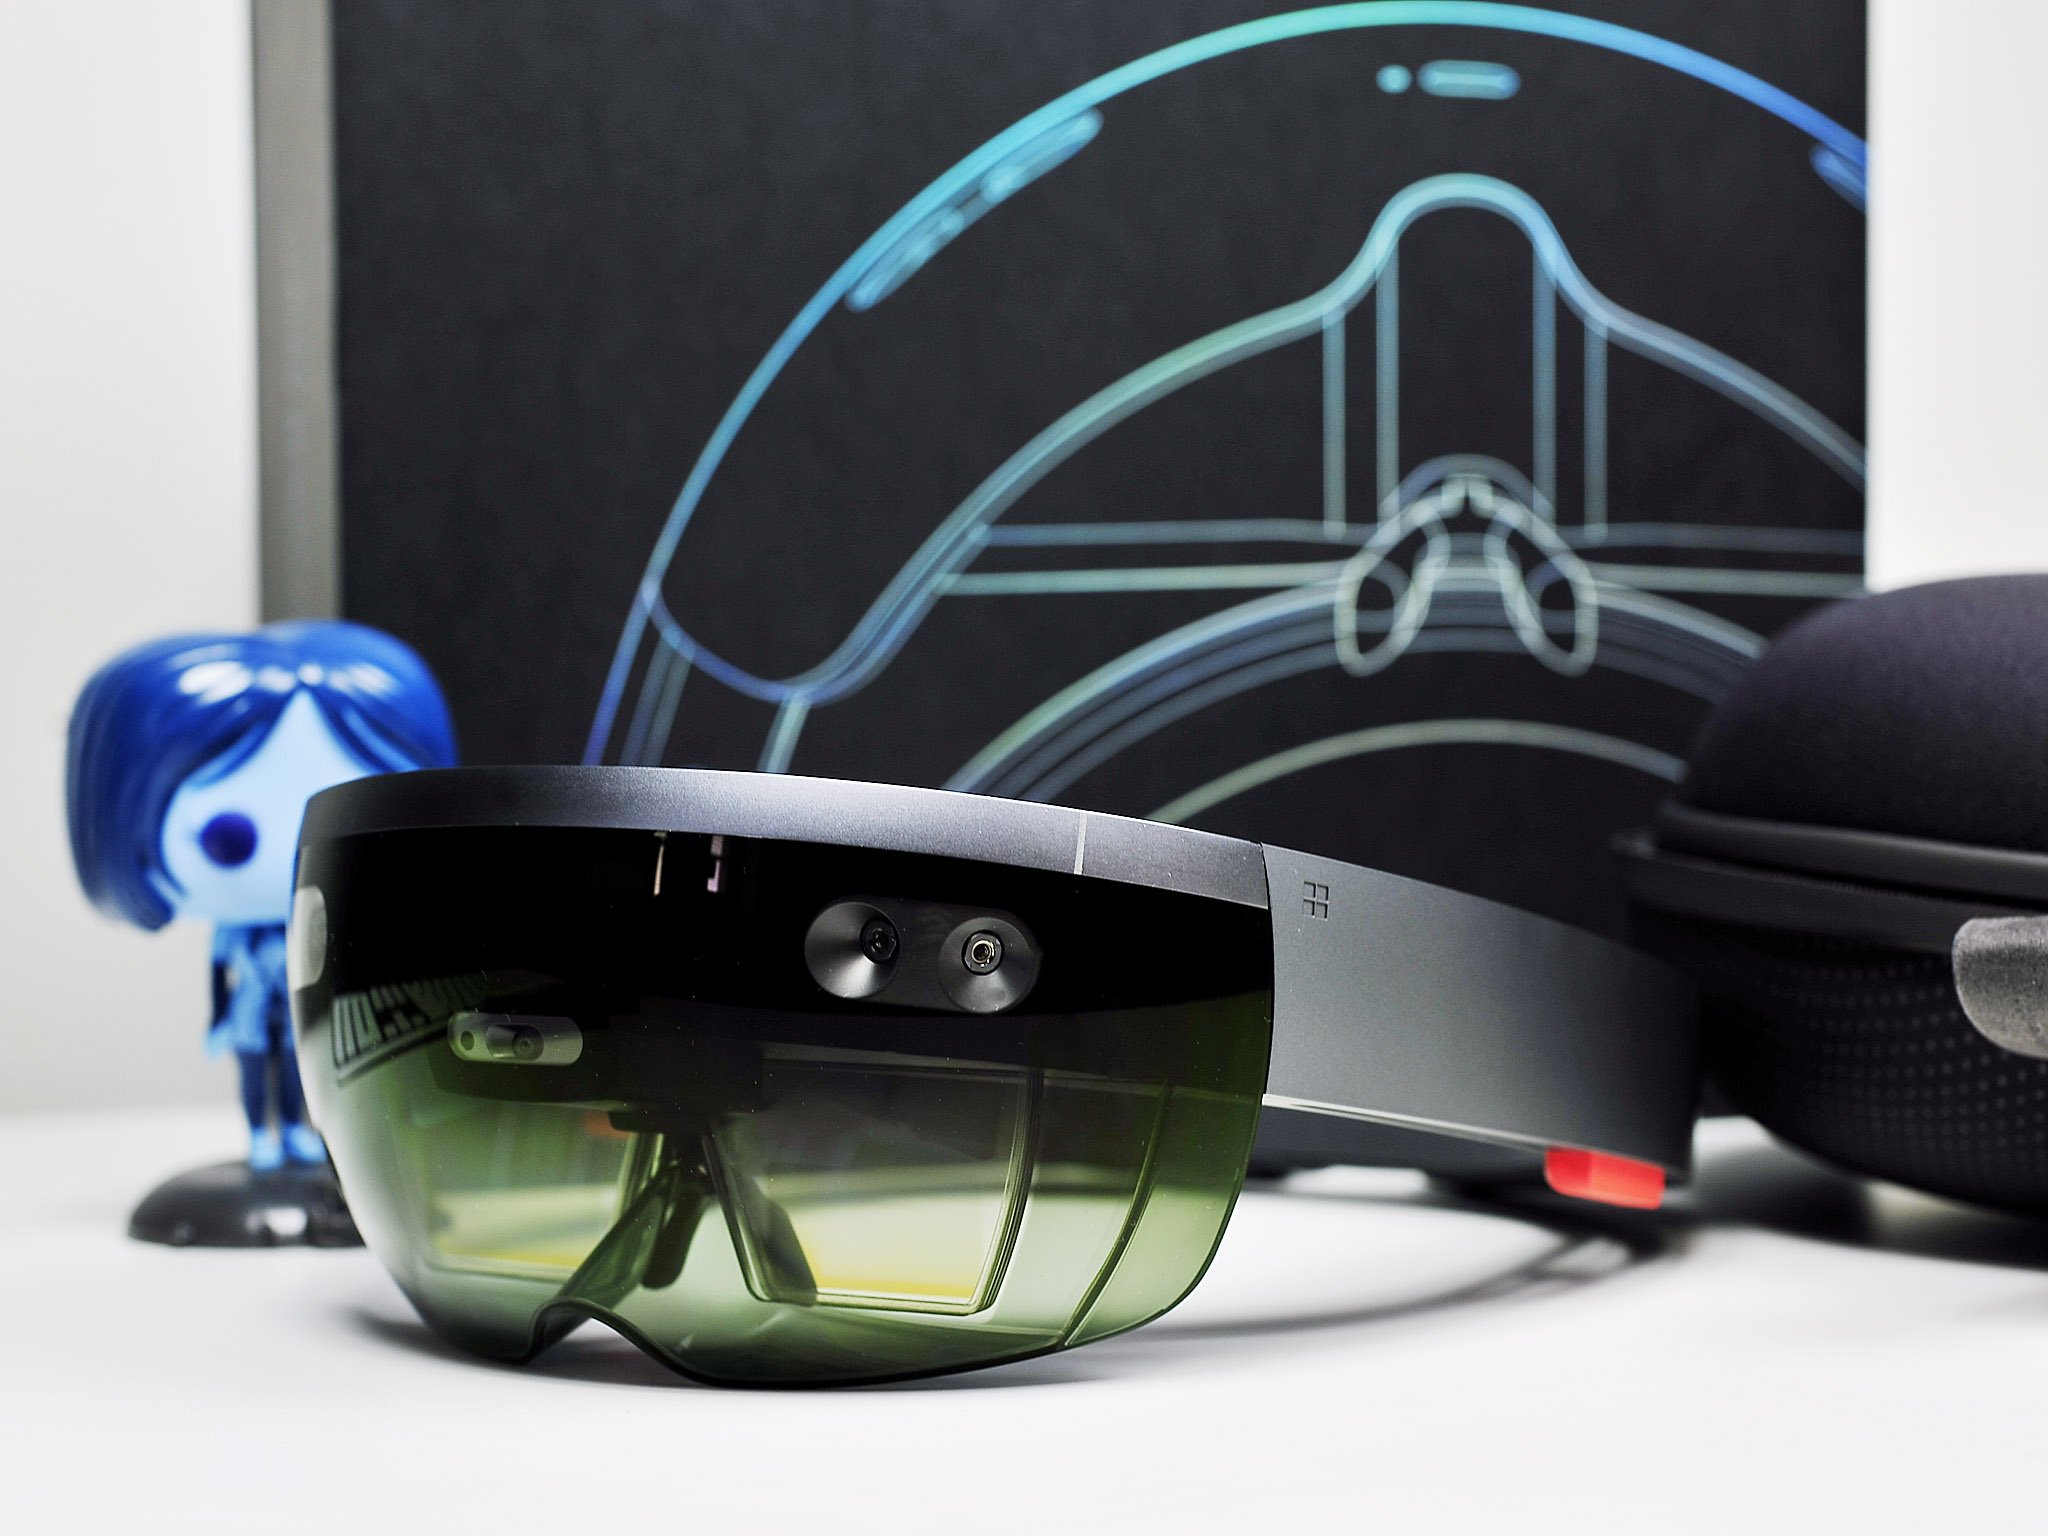 Microsoft patent suggests HoloLens 2 could pack double the field of view